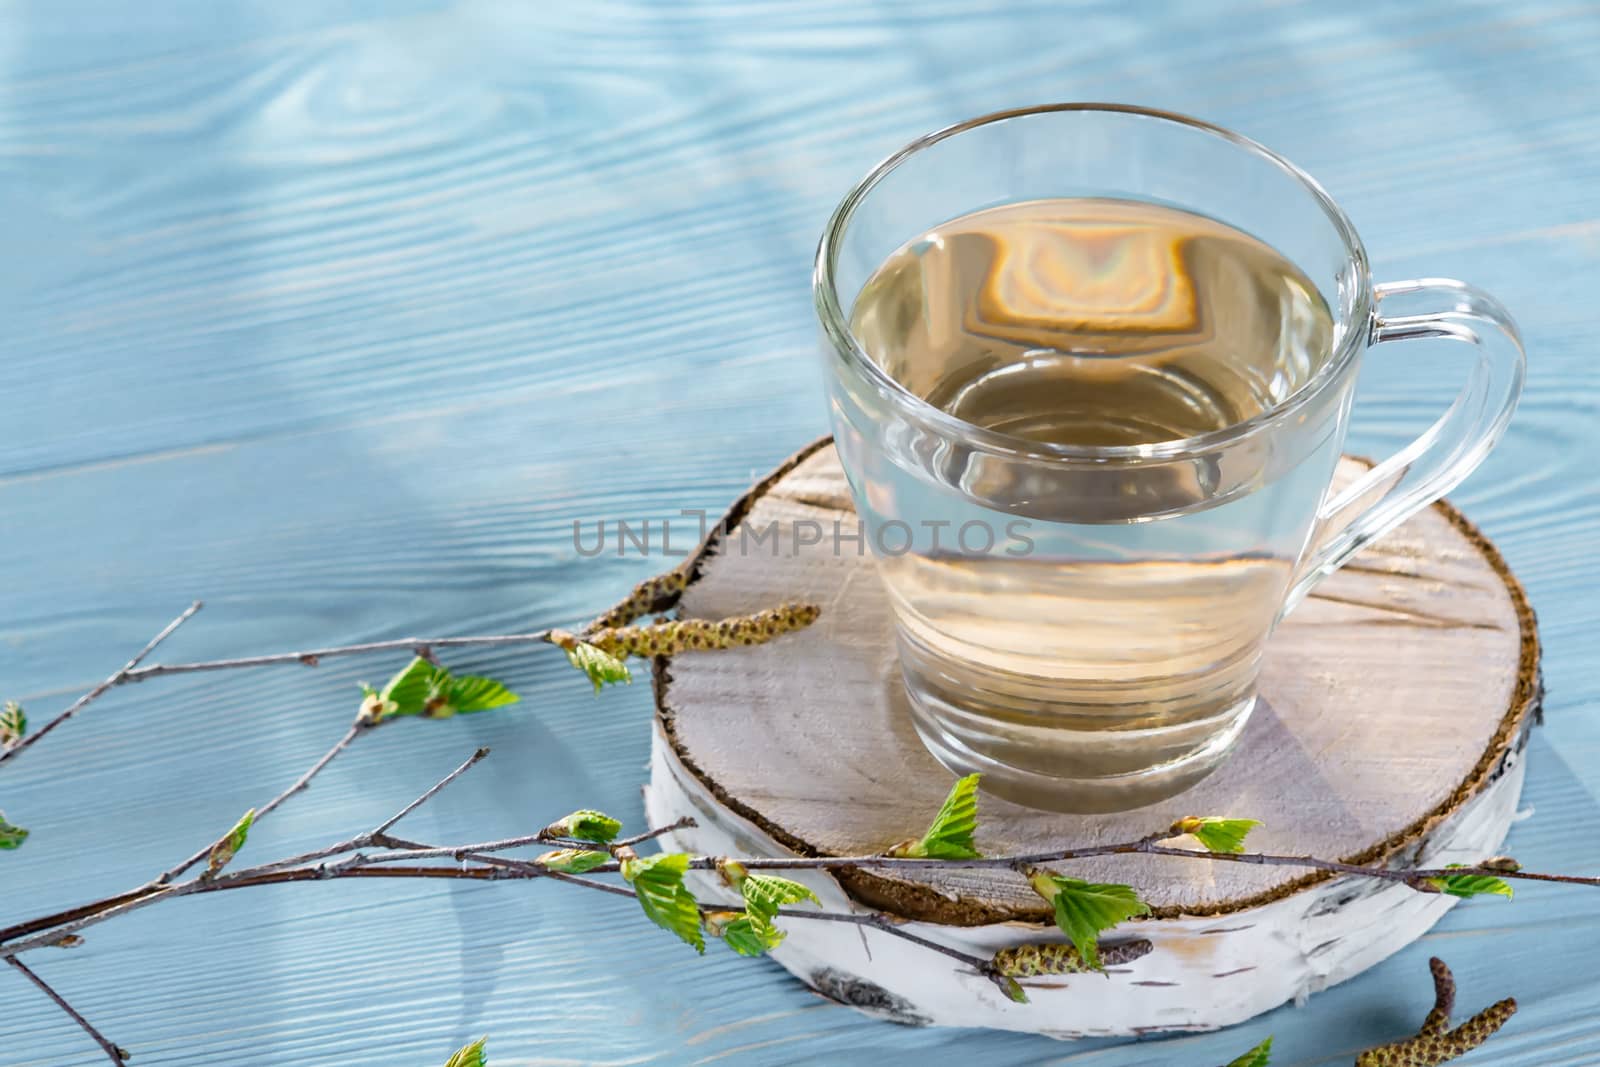 Birch juice on a blue wooden table in a glass mug, next to a branch of birch with young leaves, copy space, place for text.